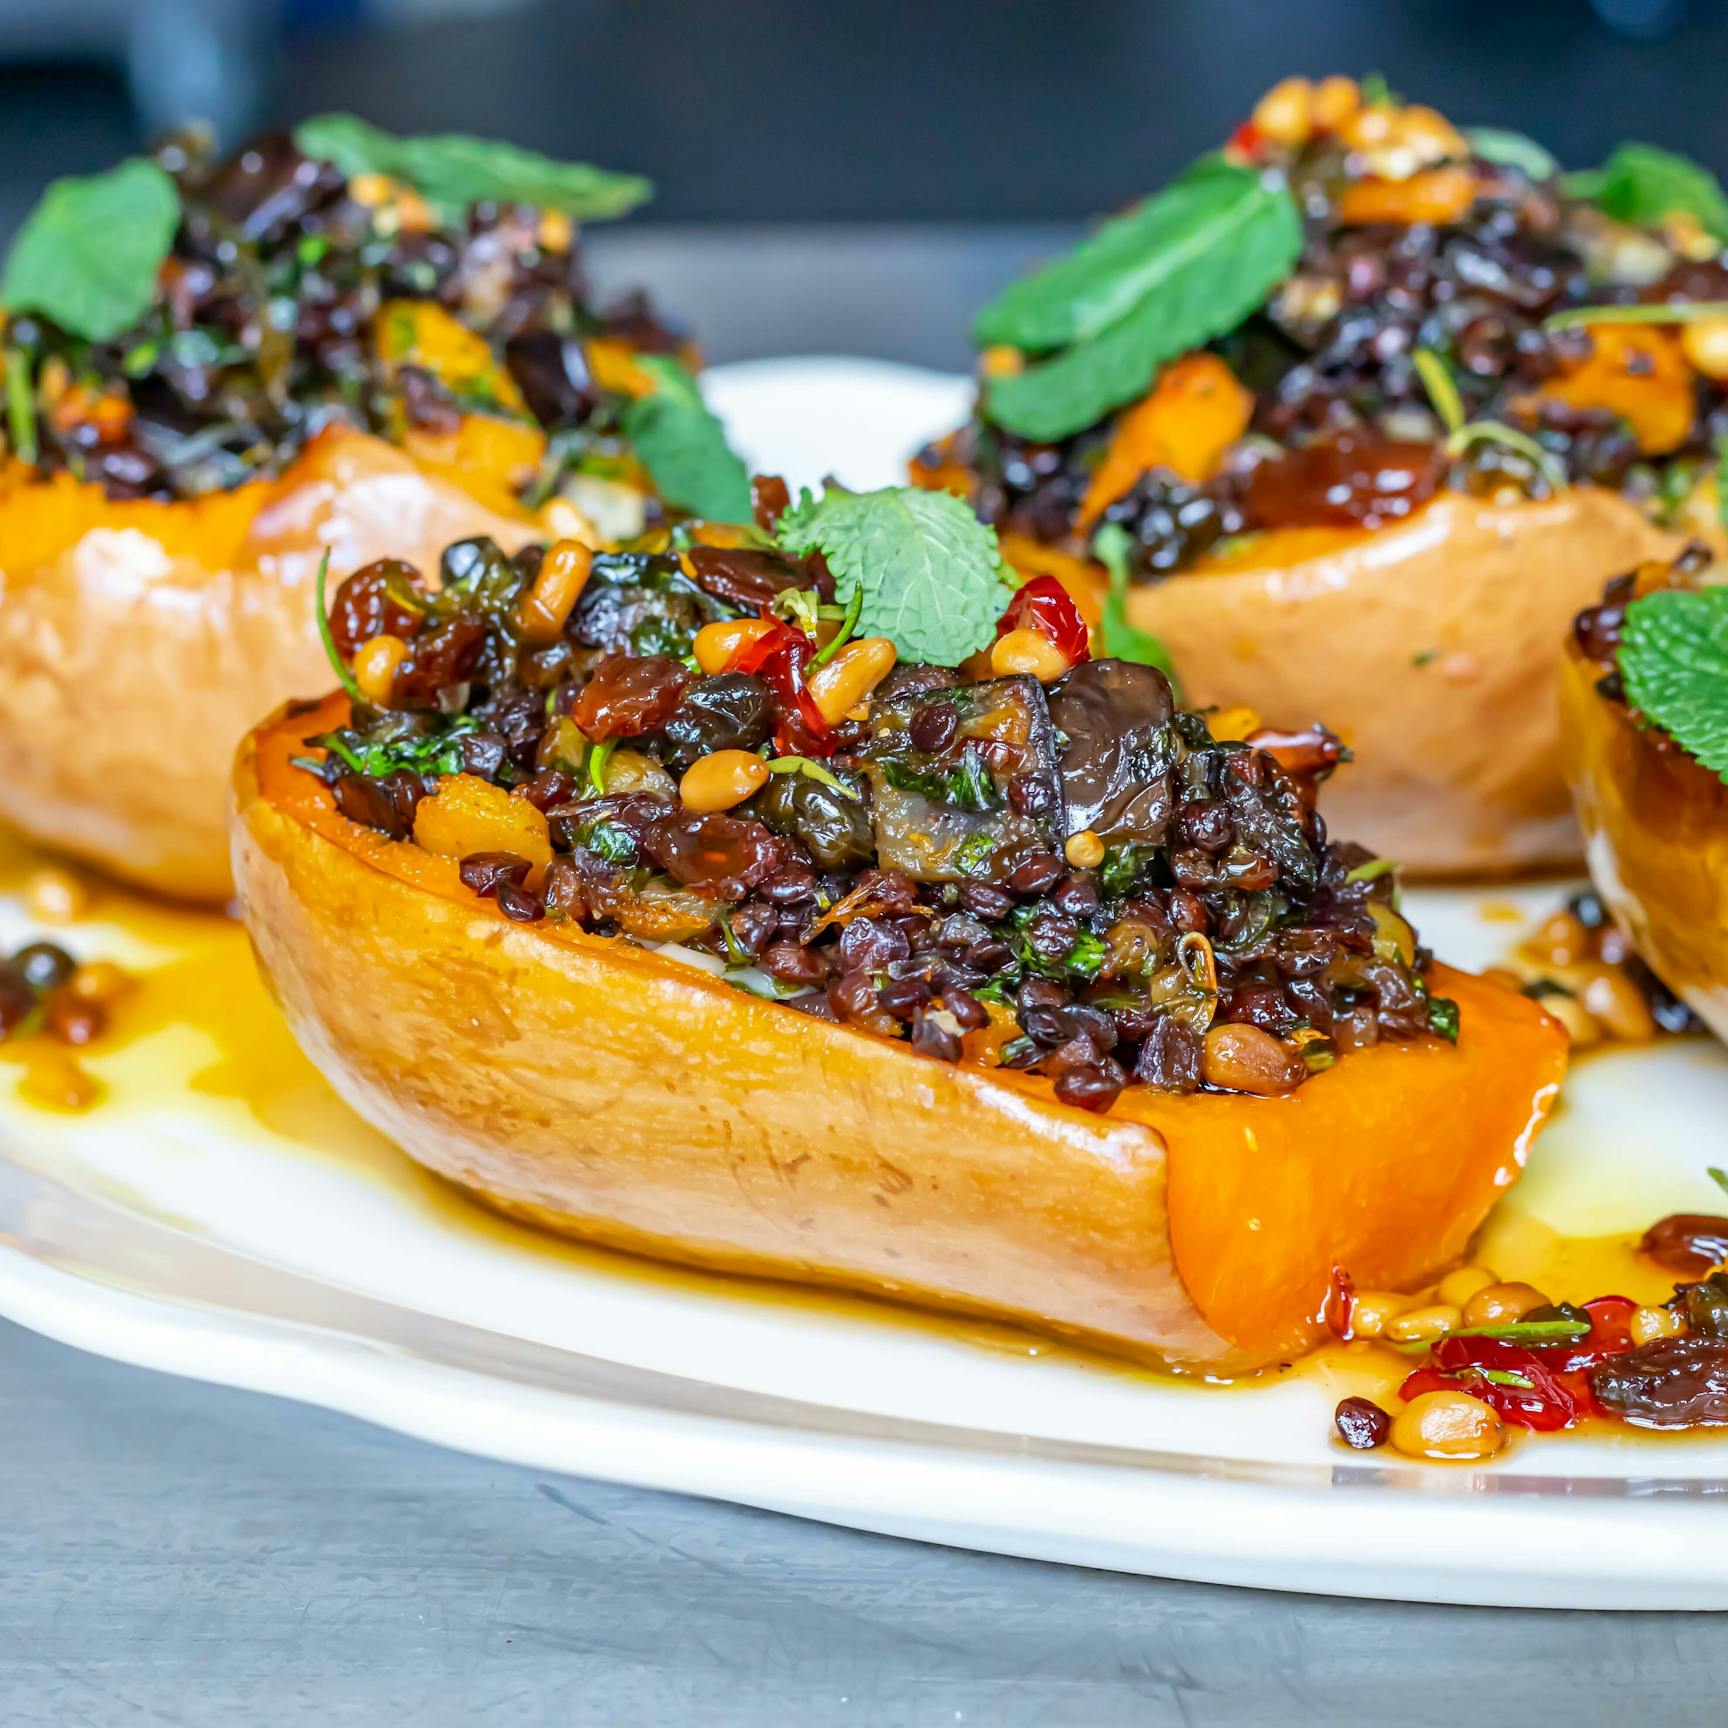 Stuffed Squash With Pine Nut Agrodolce